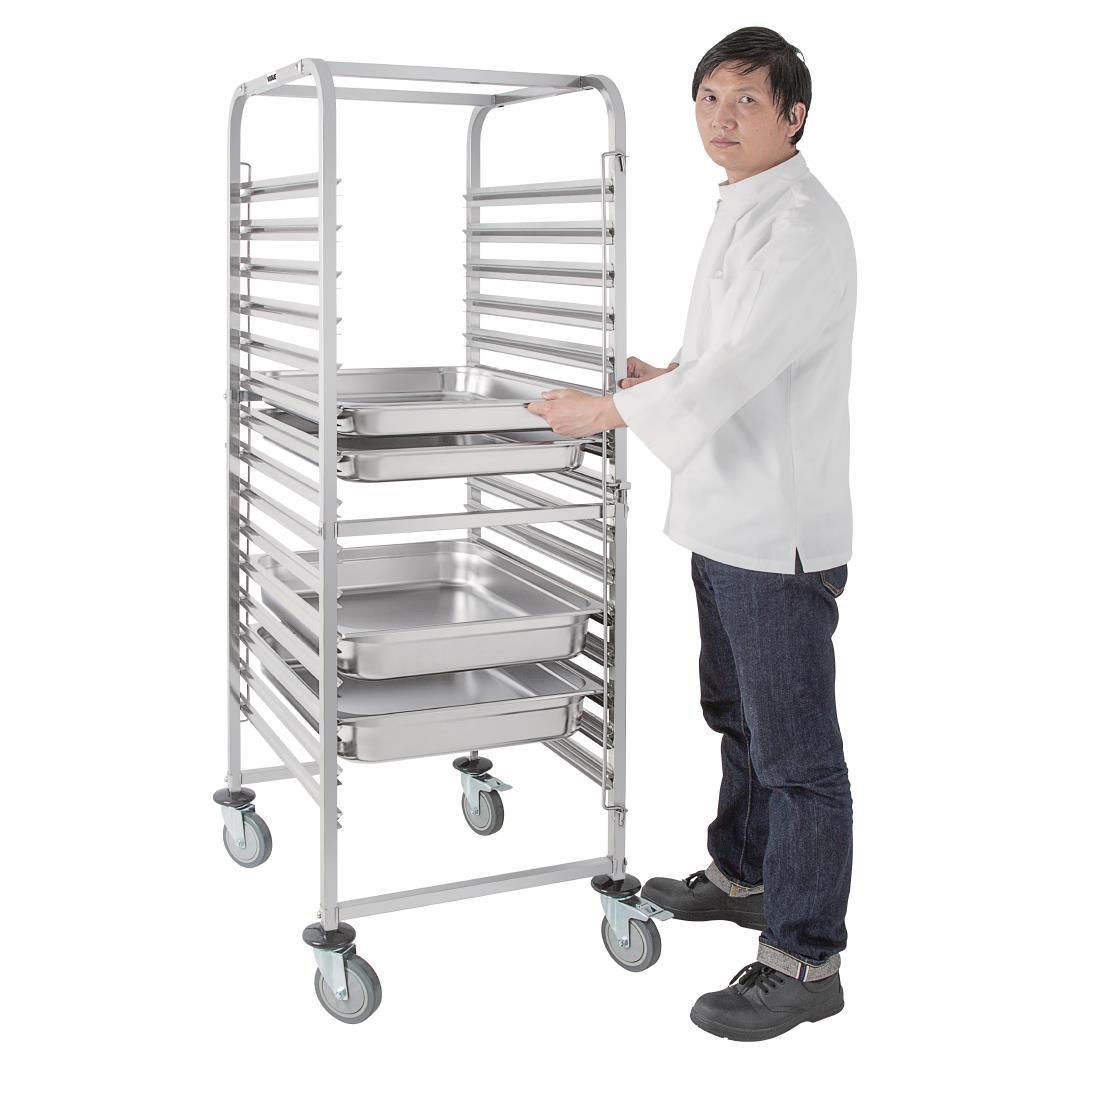 Vogue Gastronorm Racking Trolley 15 Level - GG499  - 3